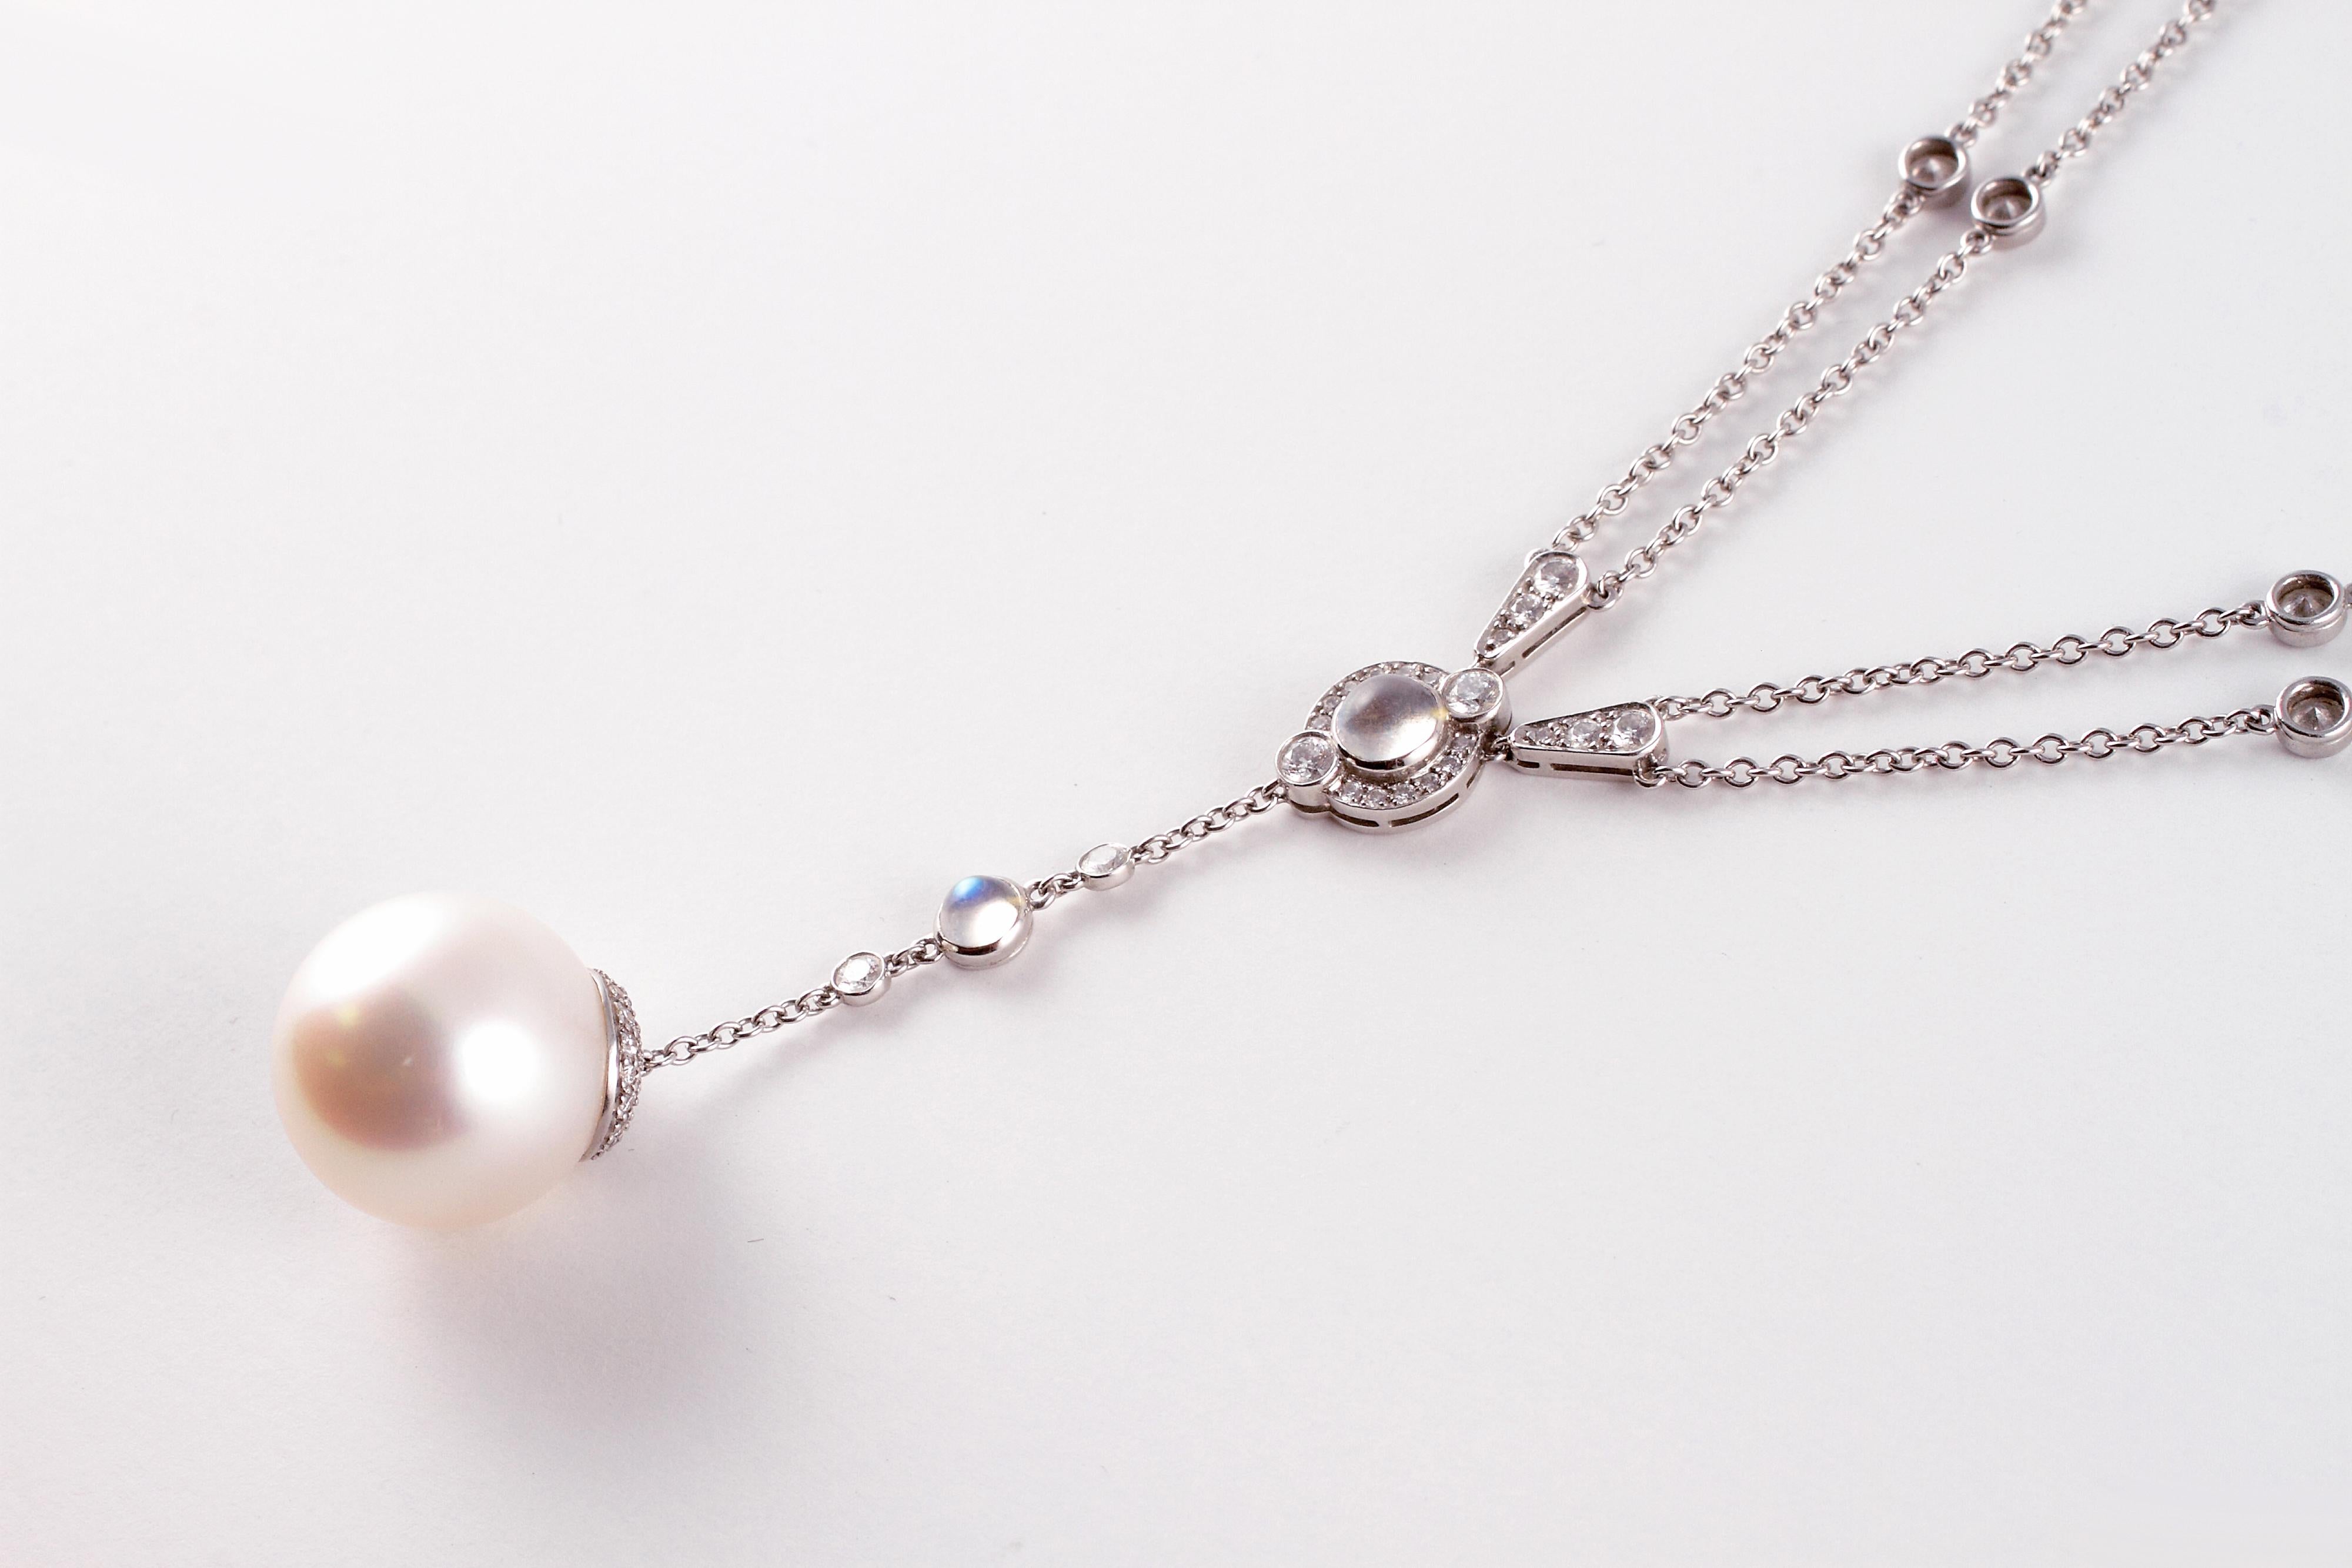 From Tiffany & Company..... this platinum, South Sea cultured pearl, moonstone and diamond necklace features  one 16.10 mm South Sea pearl, cabochon-cut moonstones and 3.02 carats of sparking diamonds stated to be VS in clarity and G in color.   The